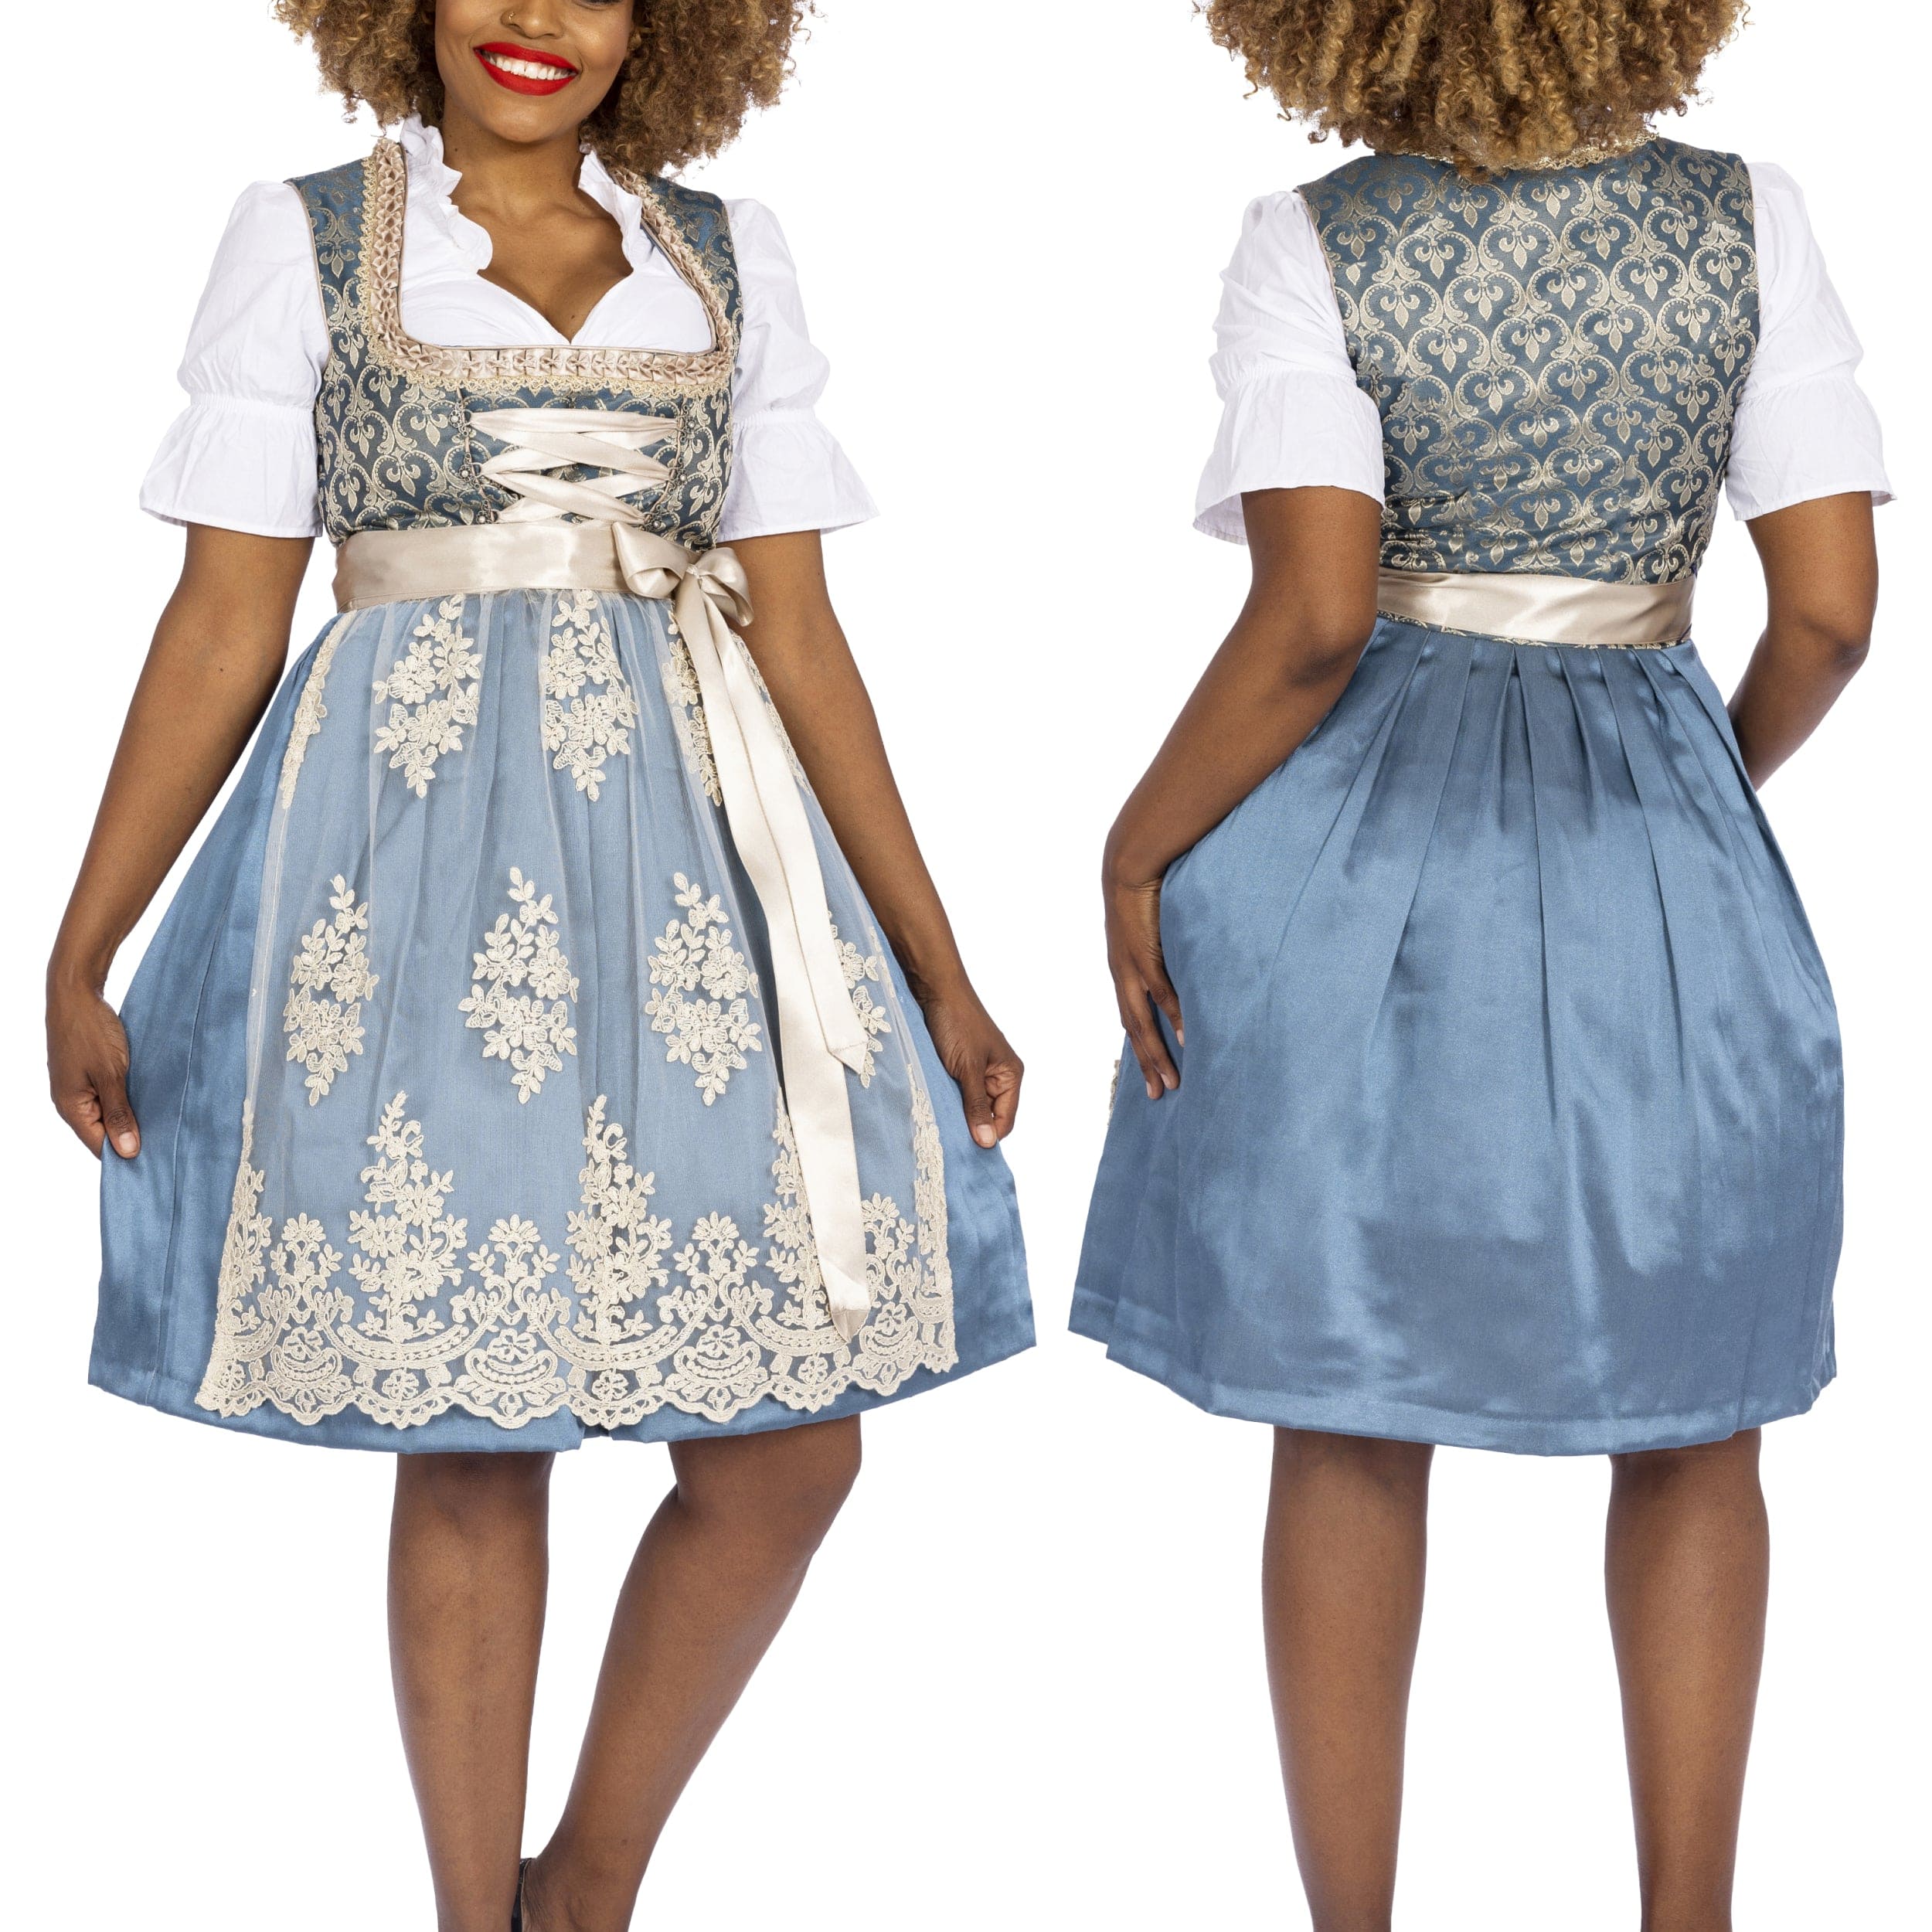  RSLOVE Womens Oktoberfest Dirndl Blouse Shirt for Authentic  Dirndls Costume Traditional Bavarian Lace Crop Top Off Shoulder White S :  Clothing, Shoes & Jewelry